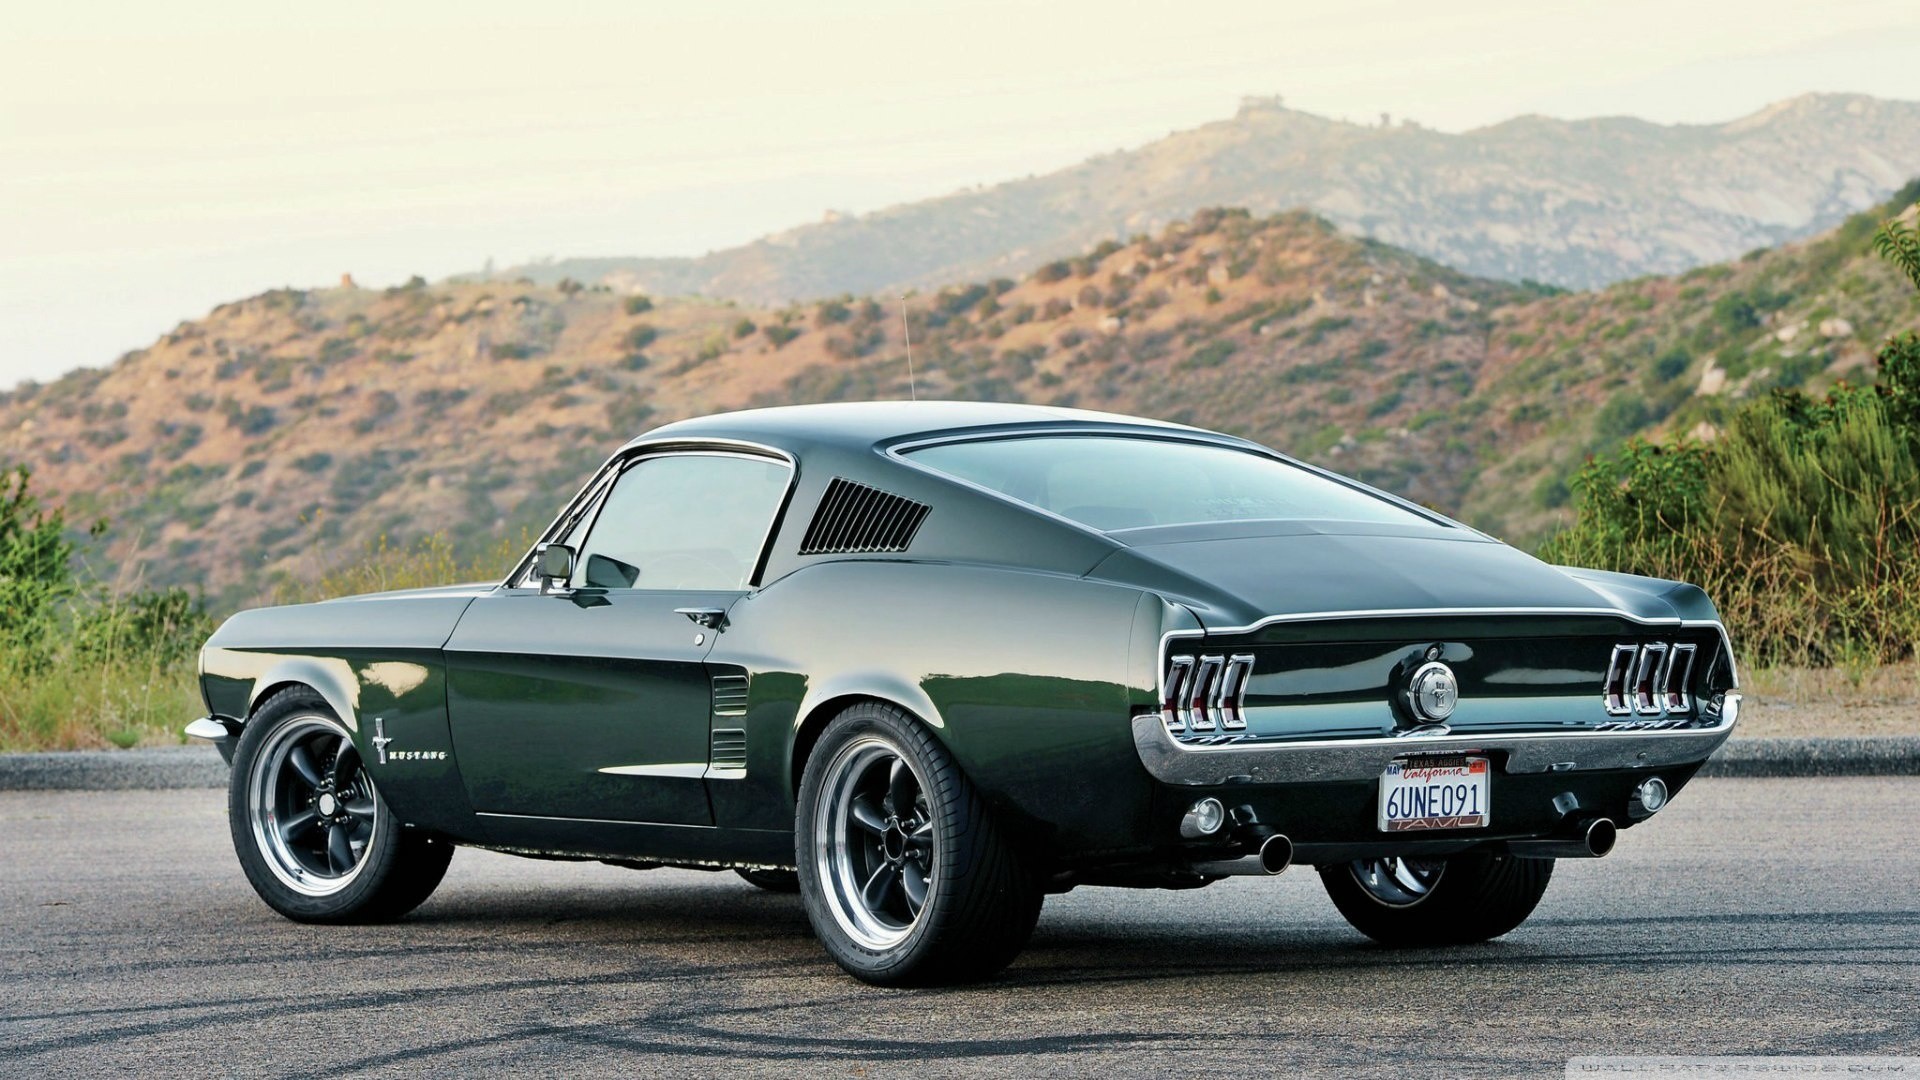 1920x1080 ... Wallpaper Ford Mustang Fastback 1967 ...